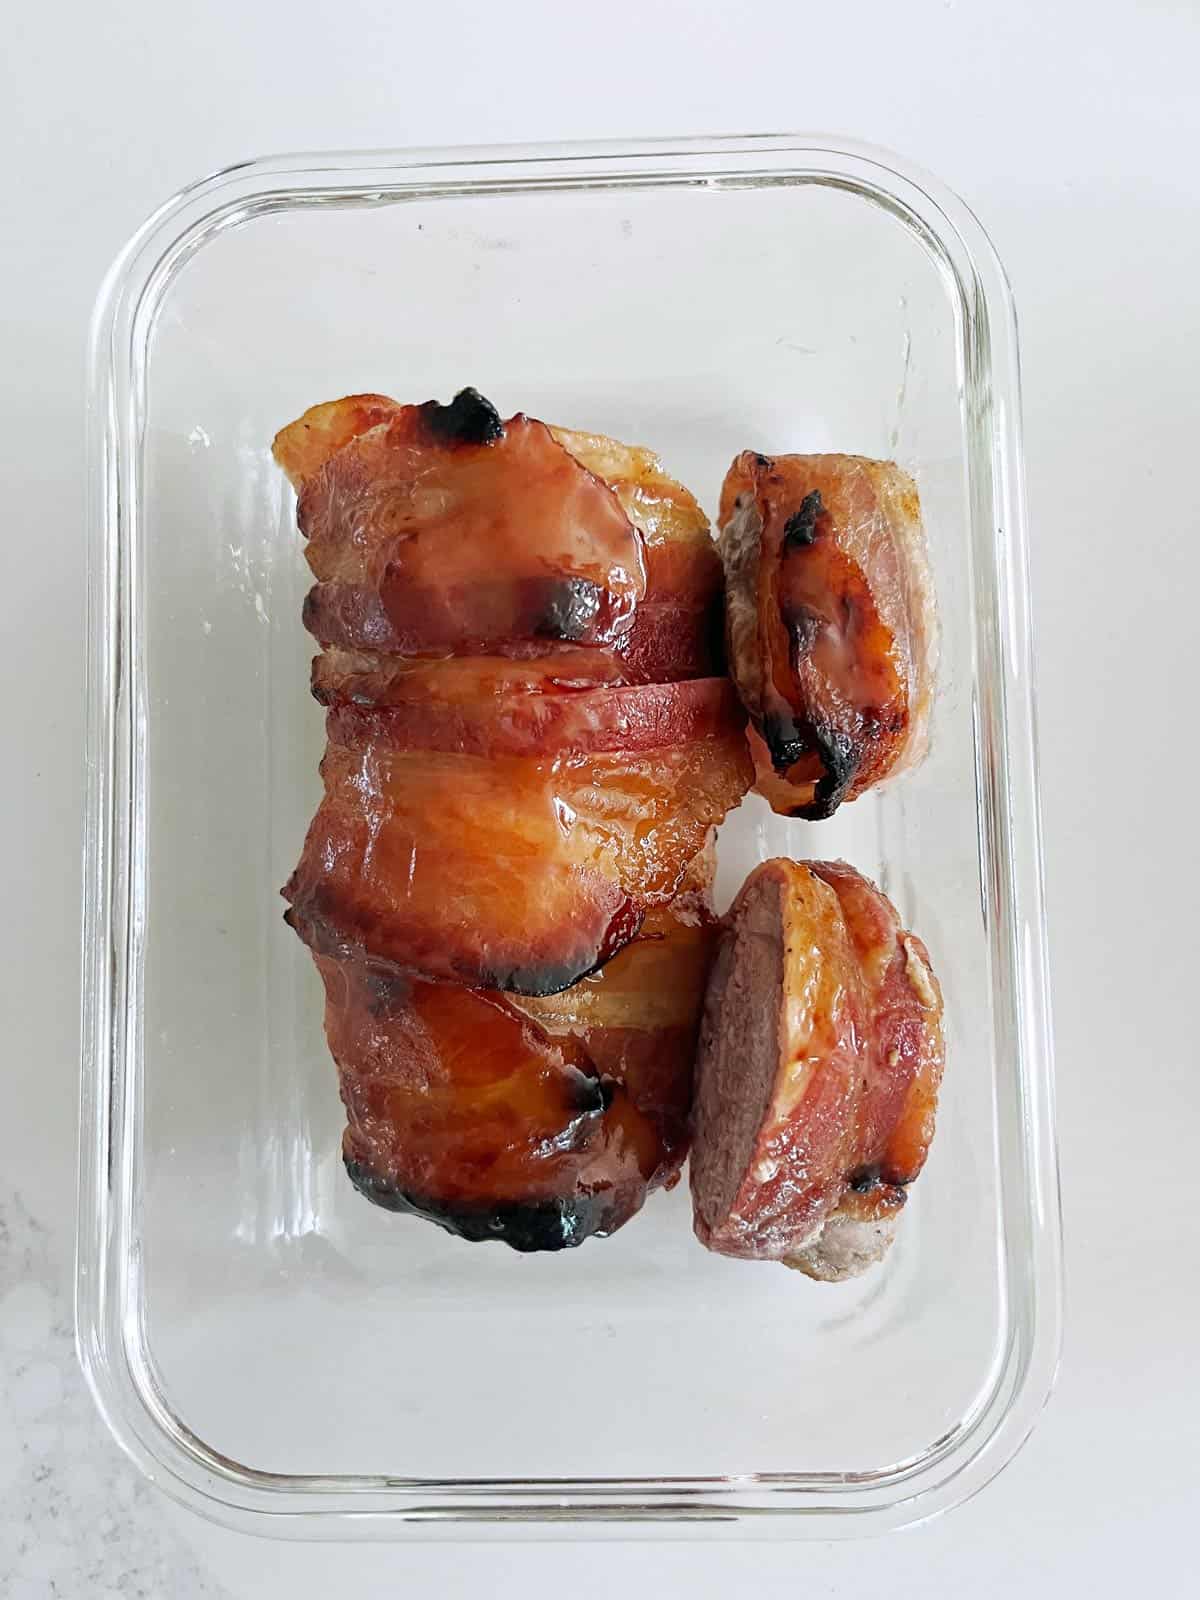 Bacon-wrapped pork tenderloin leftovers are kept in a glass food storage container.